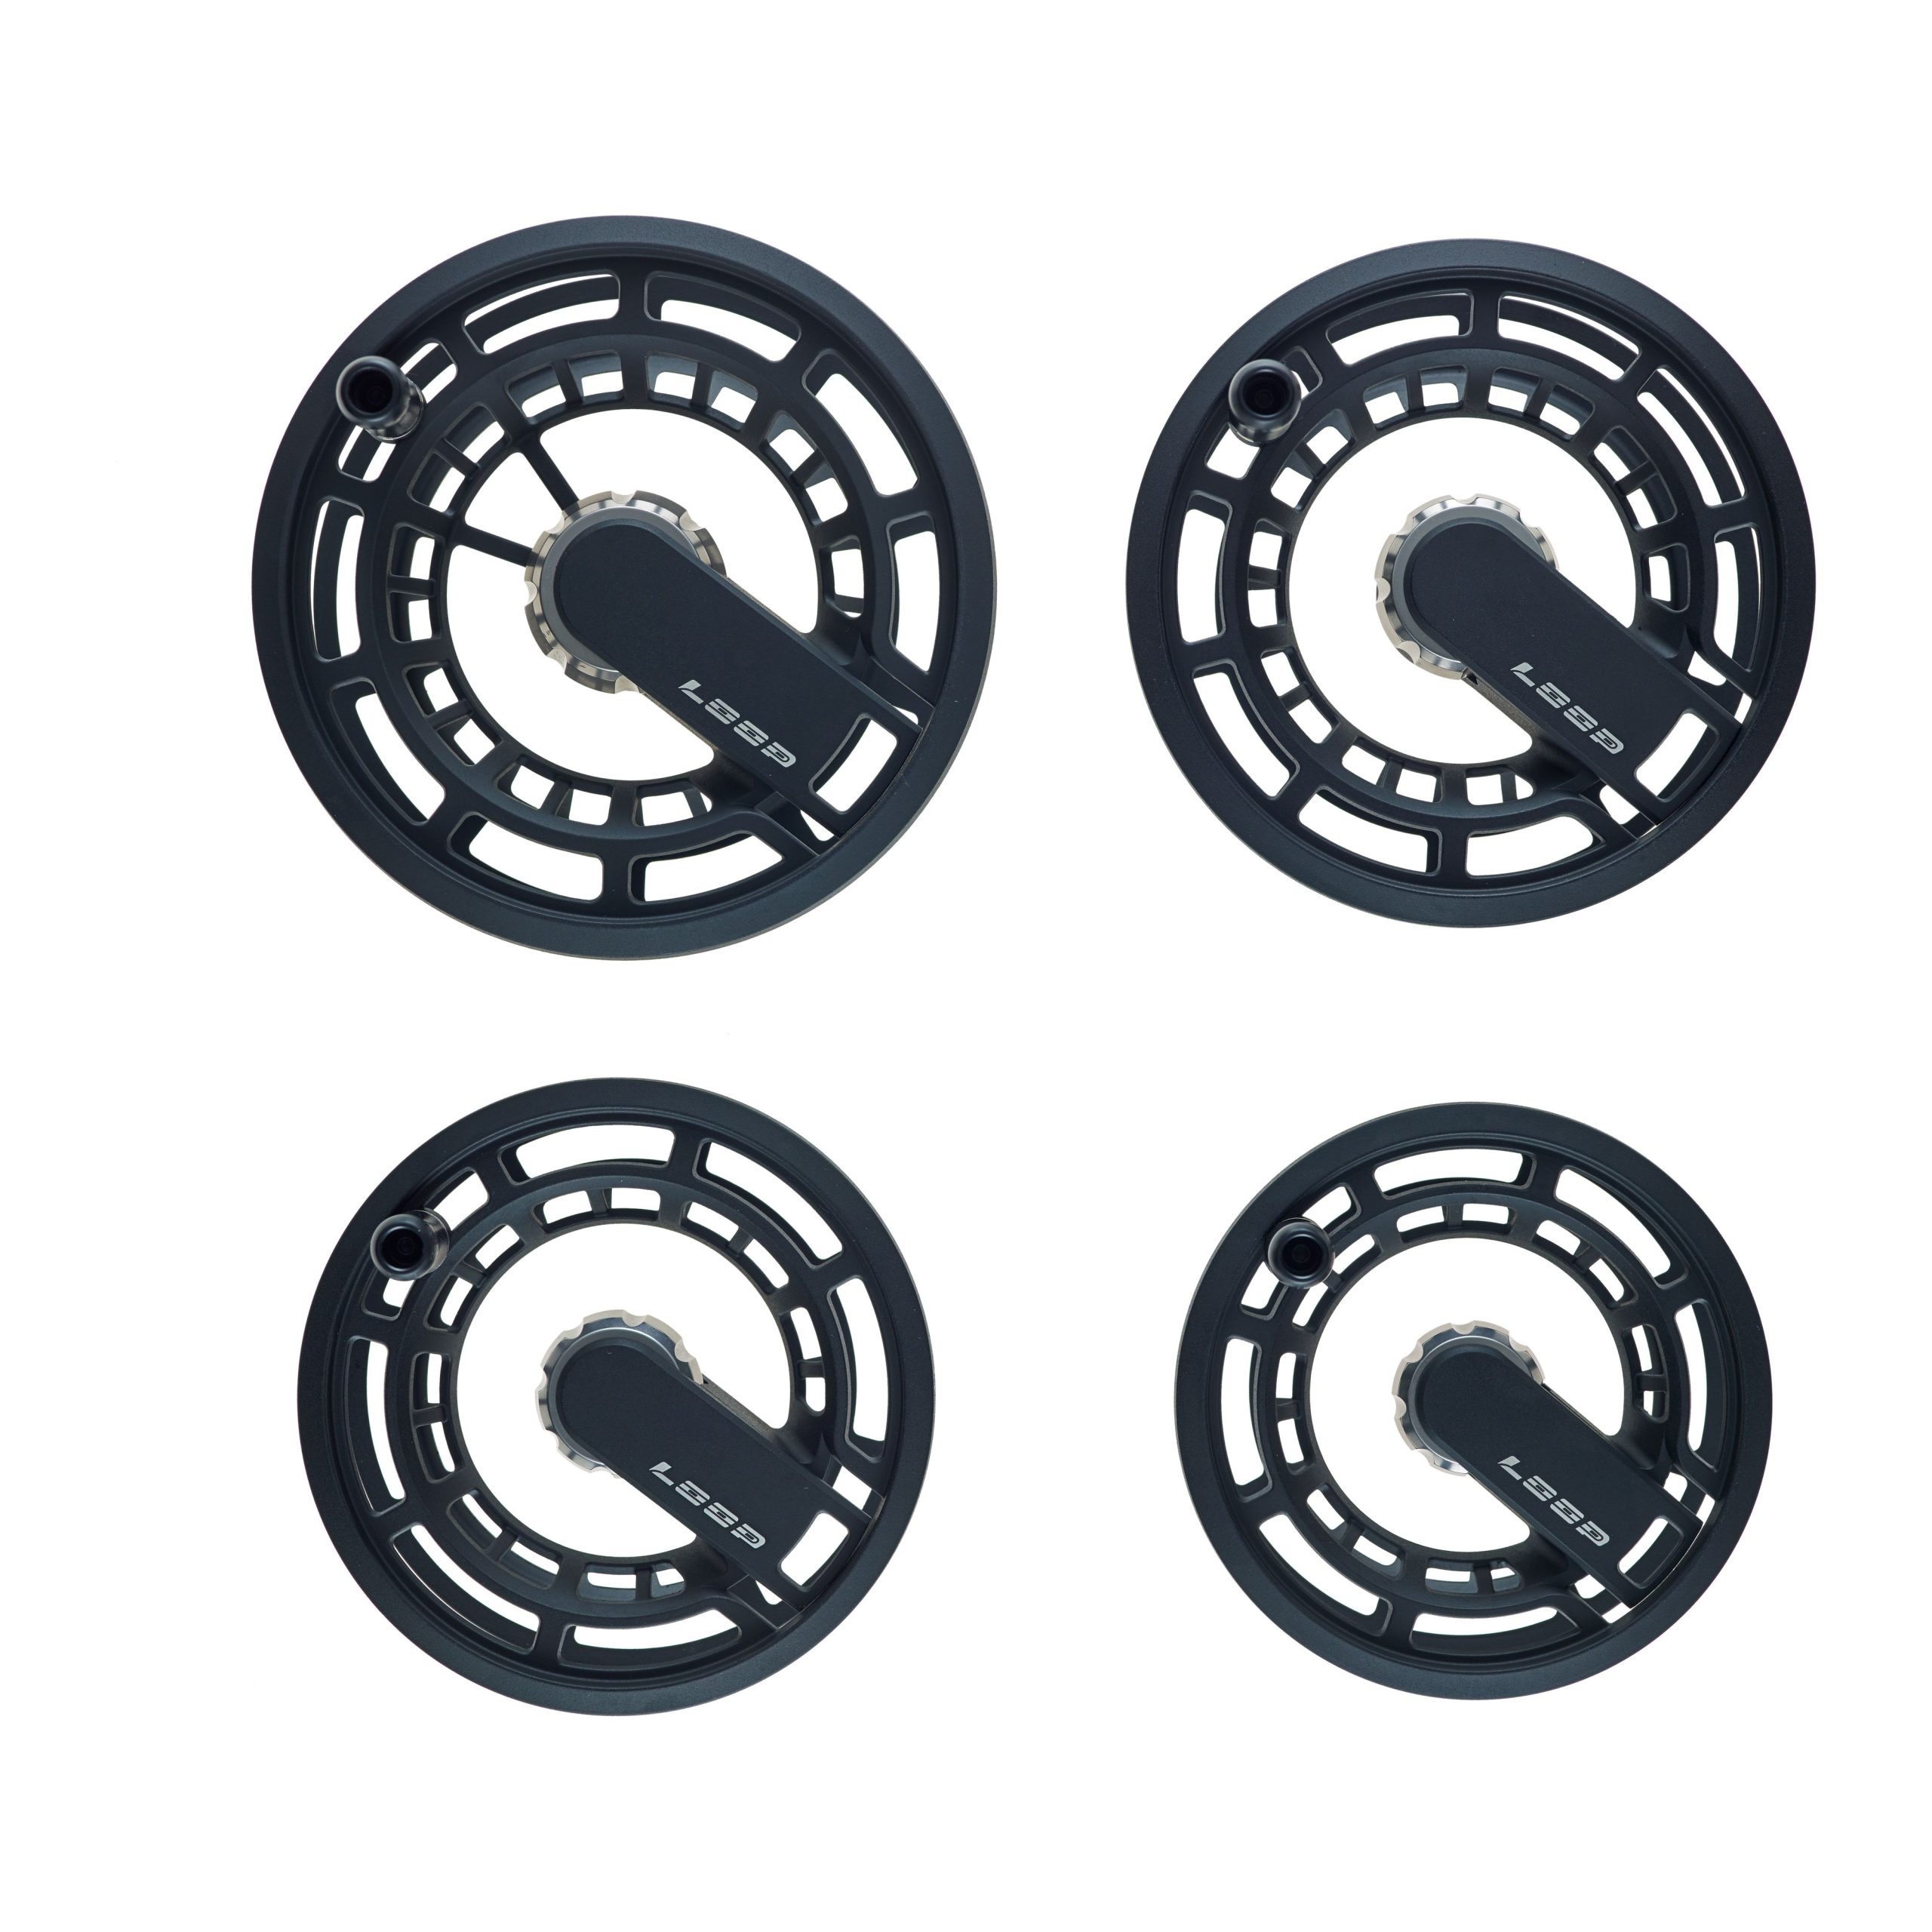 Loop Q Reel Spare Spools - Pacific Rivers Outfitting Company